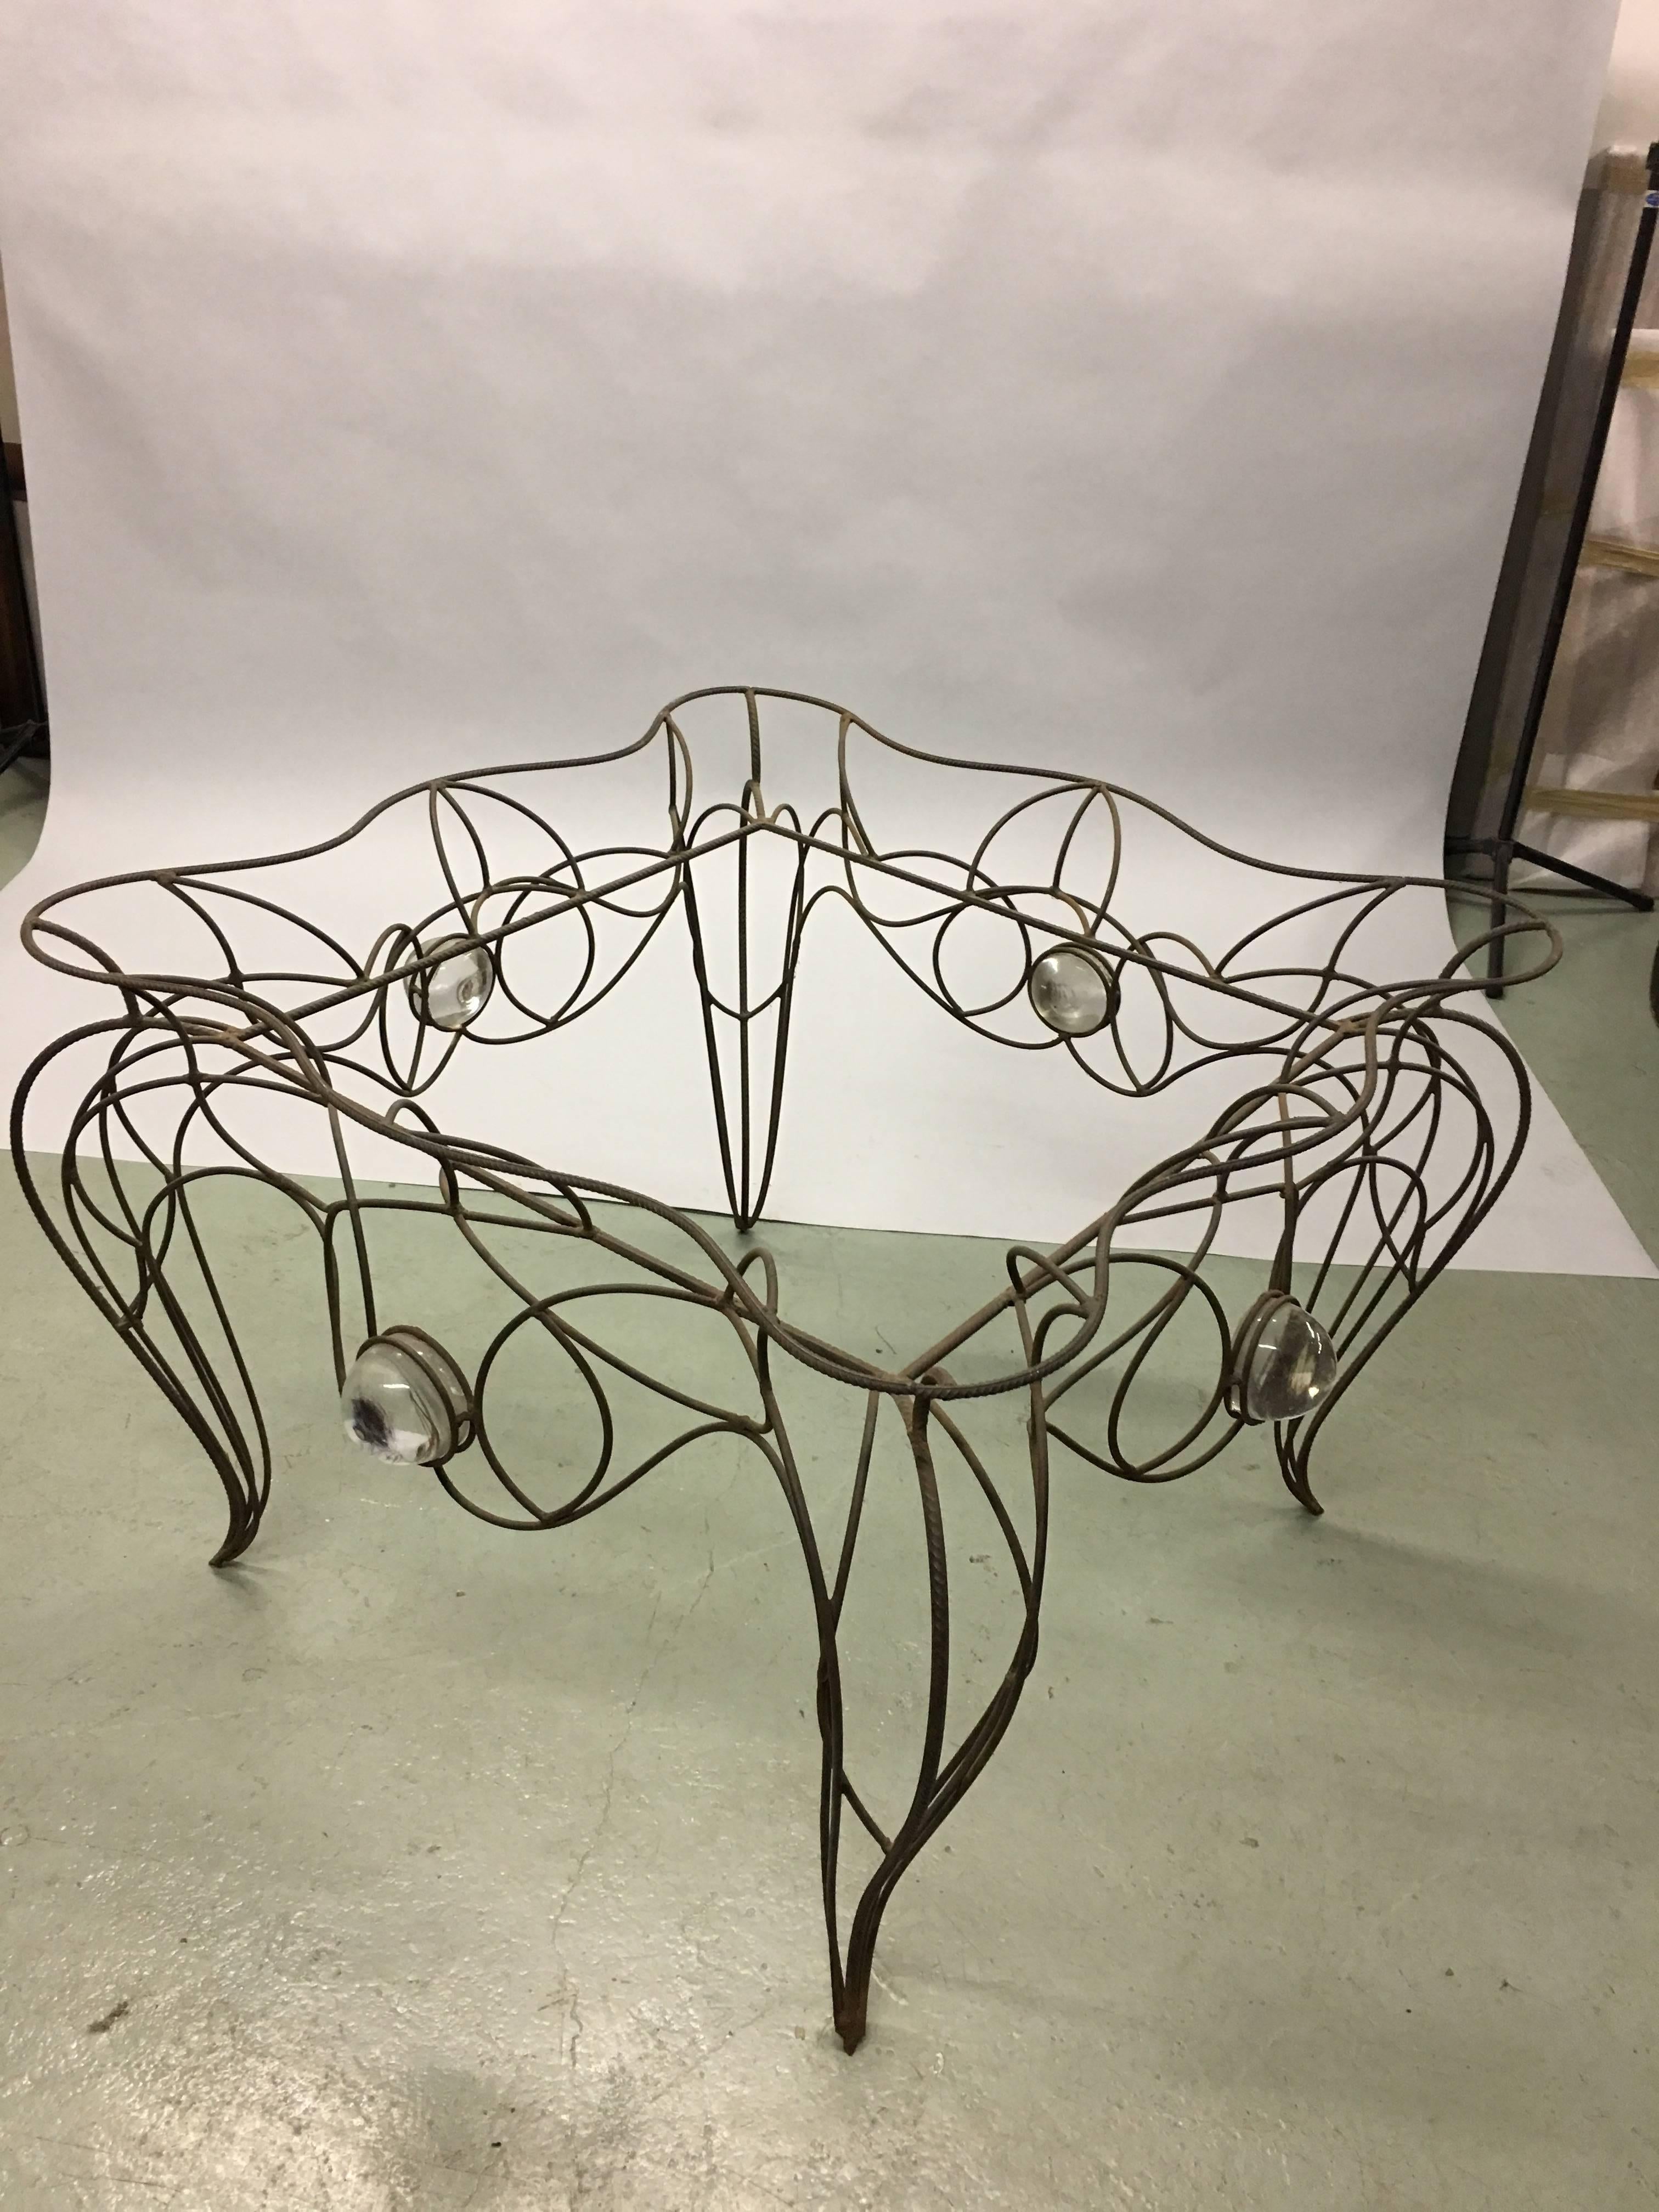 Unique Centre Table / Console in Wrought Iron and Glass by Andre Dubreuil, 1986 In Good Condition For Sale In New York, NY